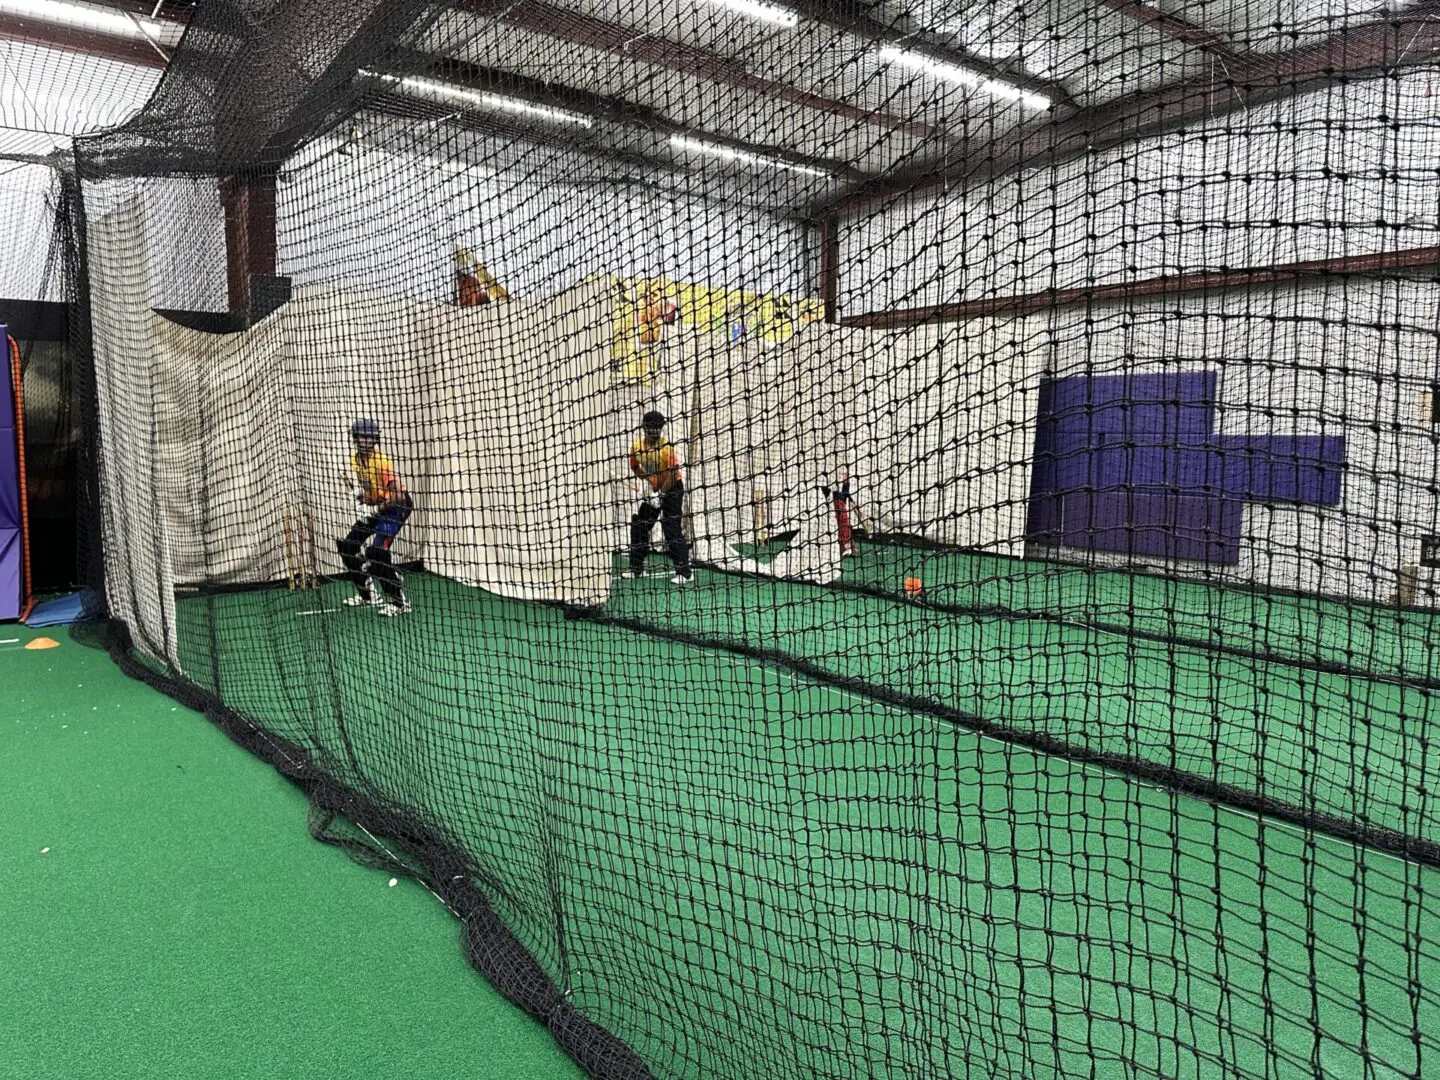 Indoor facility with green indoor turf and youth batting